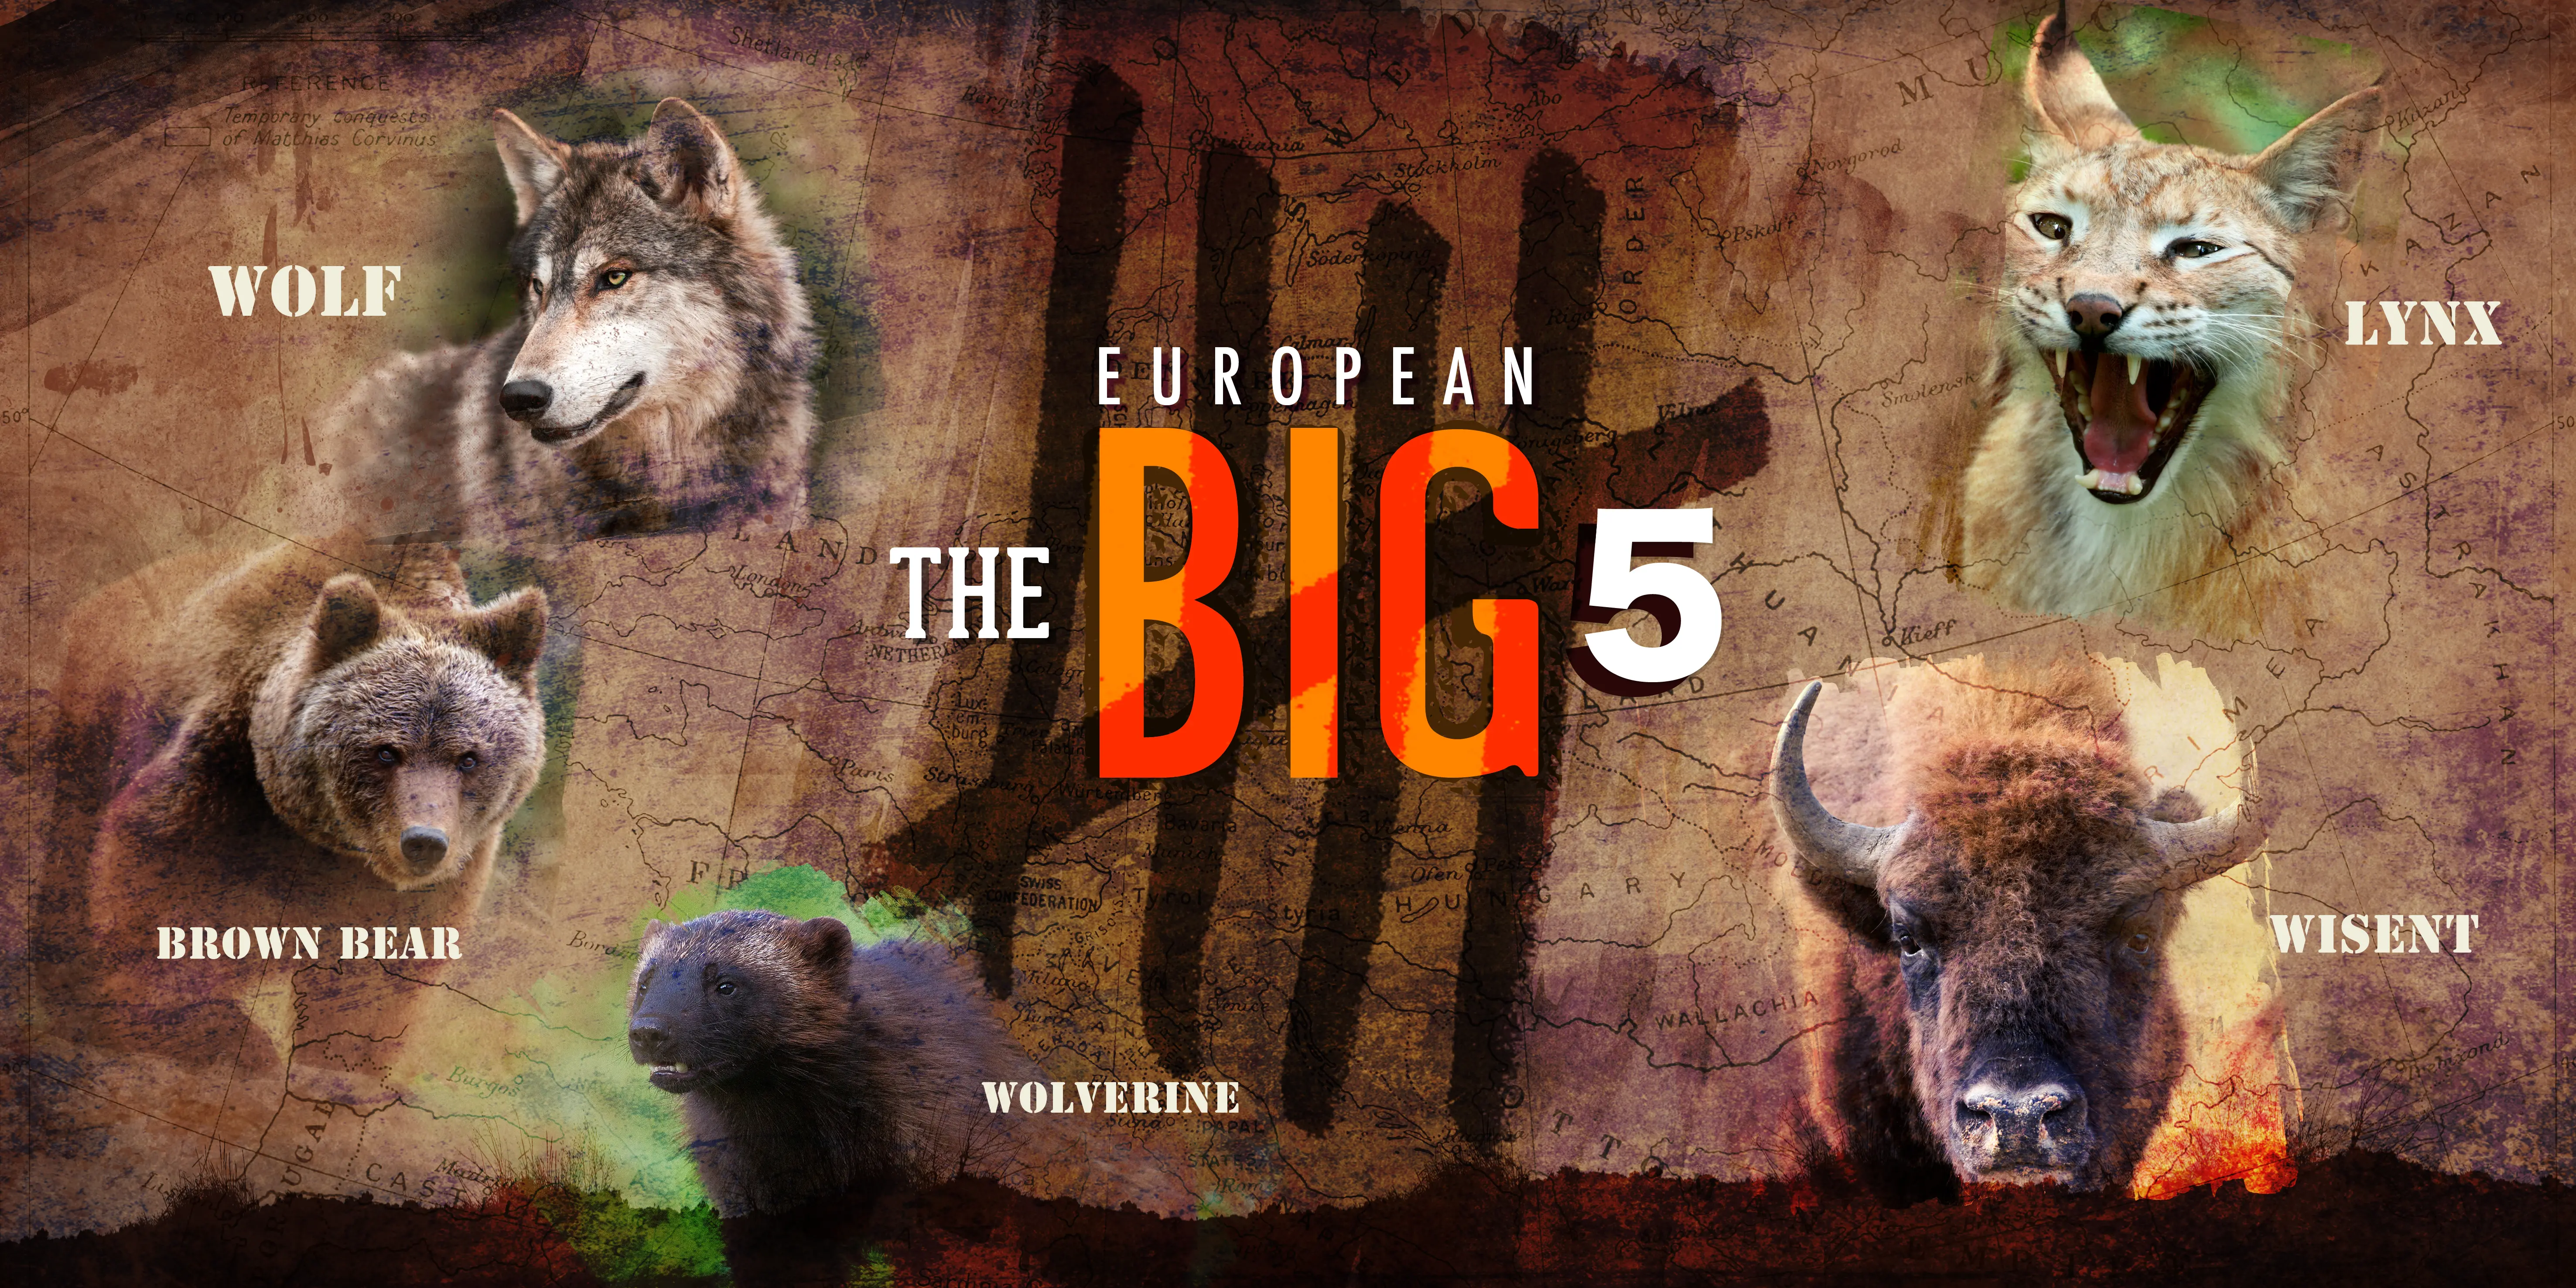 The Big Five of Europe